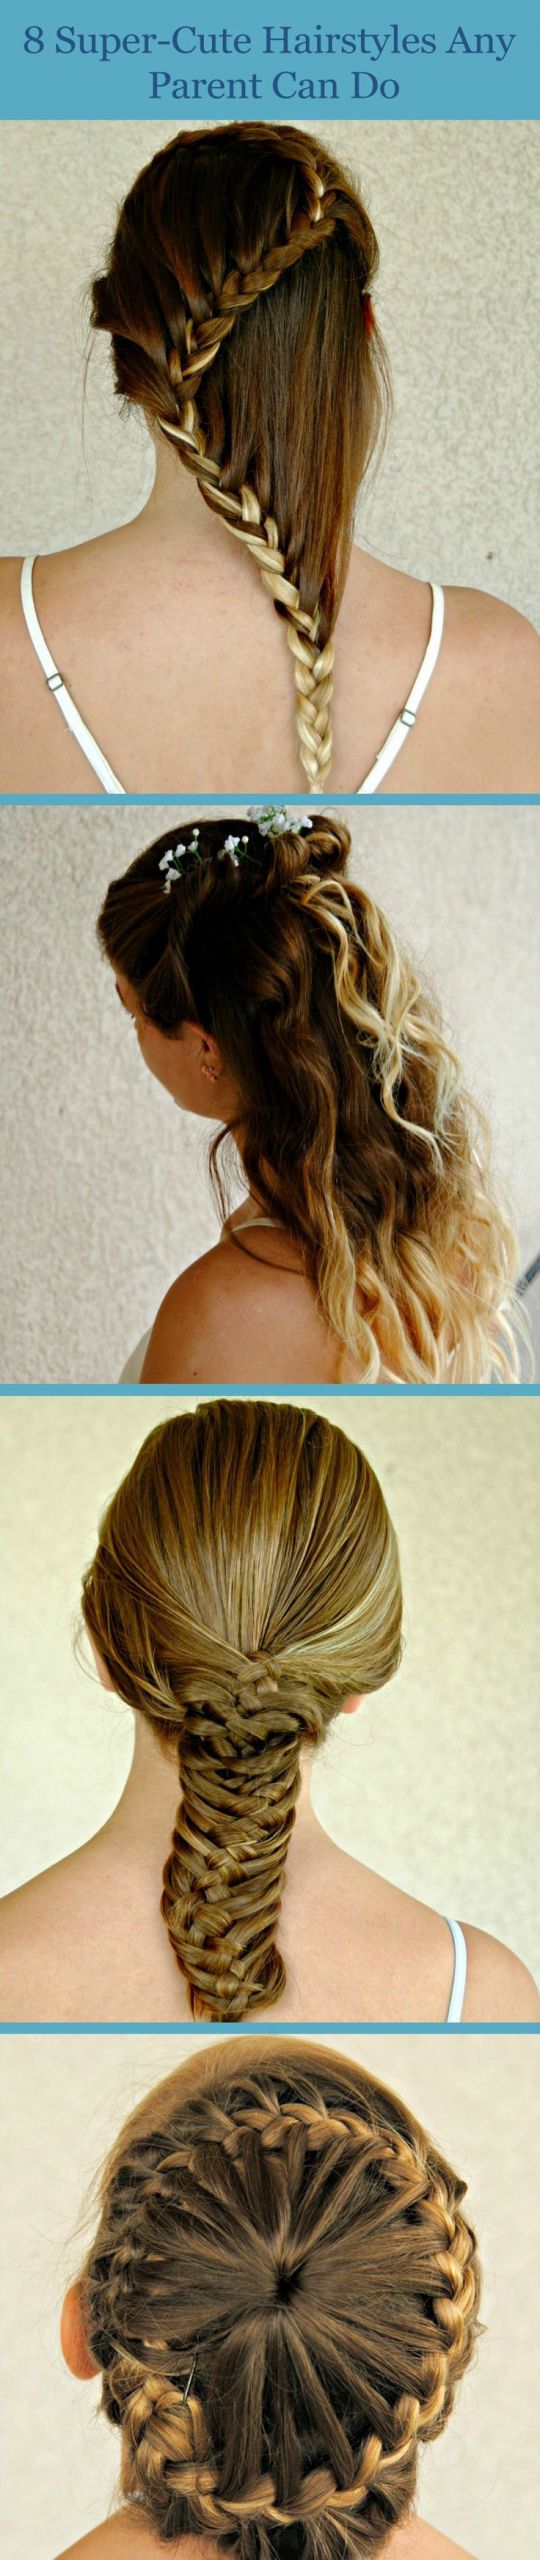 Easy Hairstyles That Kids Can Do
 New hairstyles Easy kid hairstyles and Hairstyles on